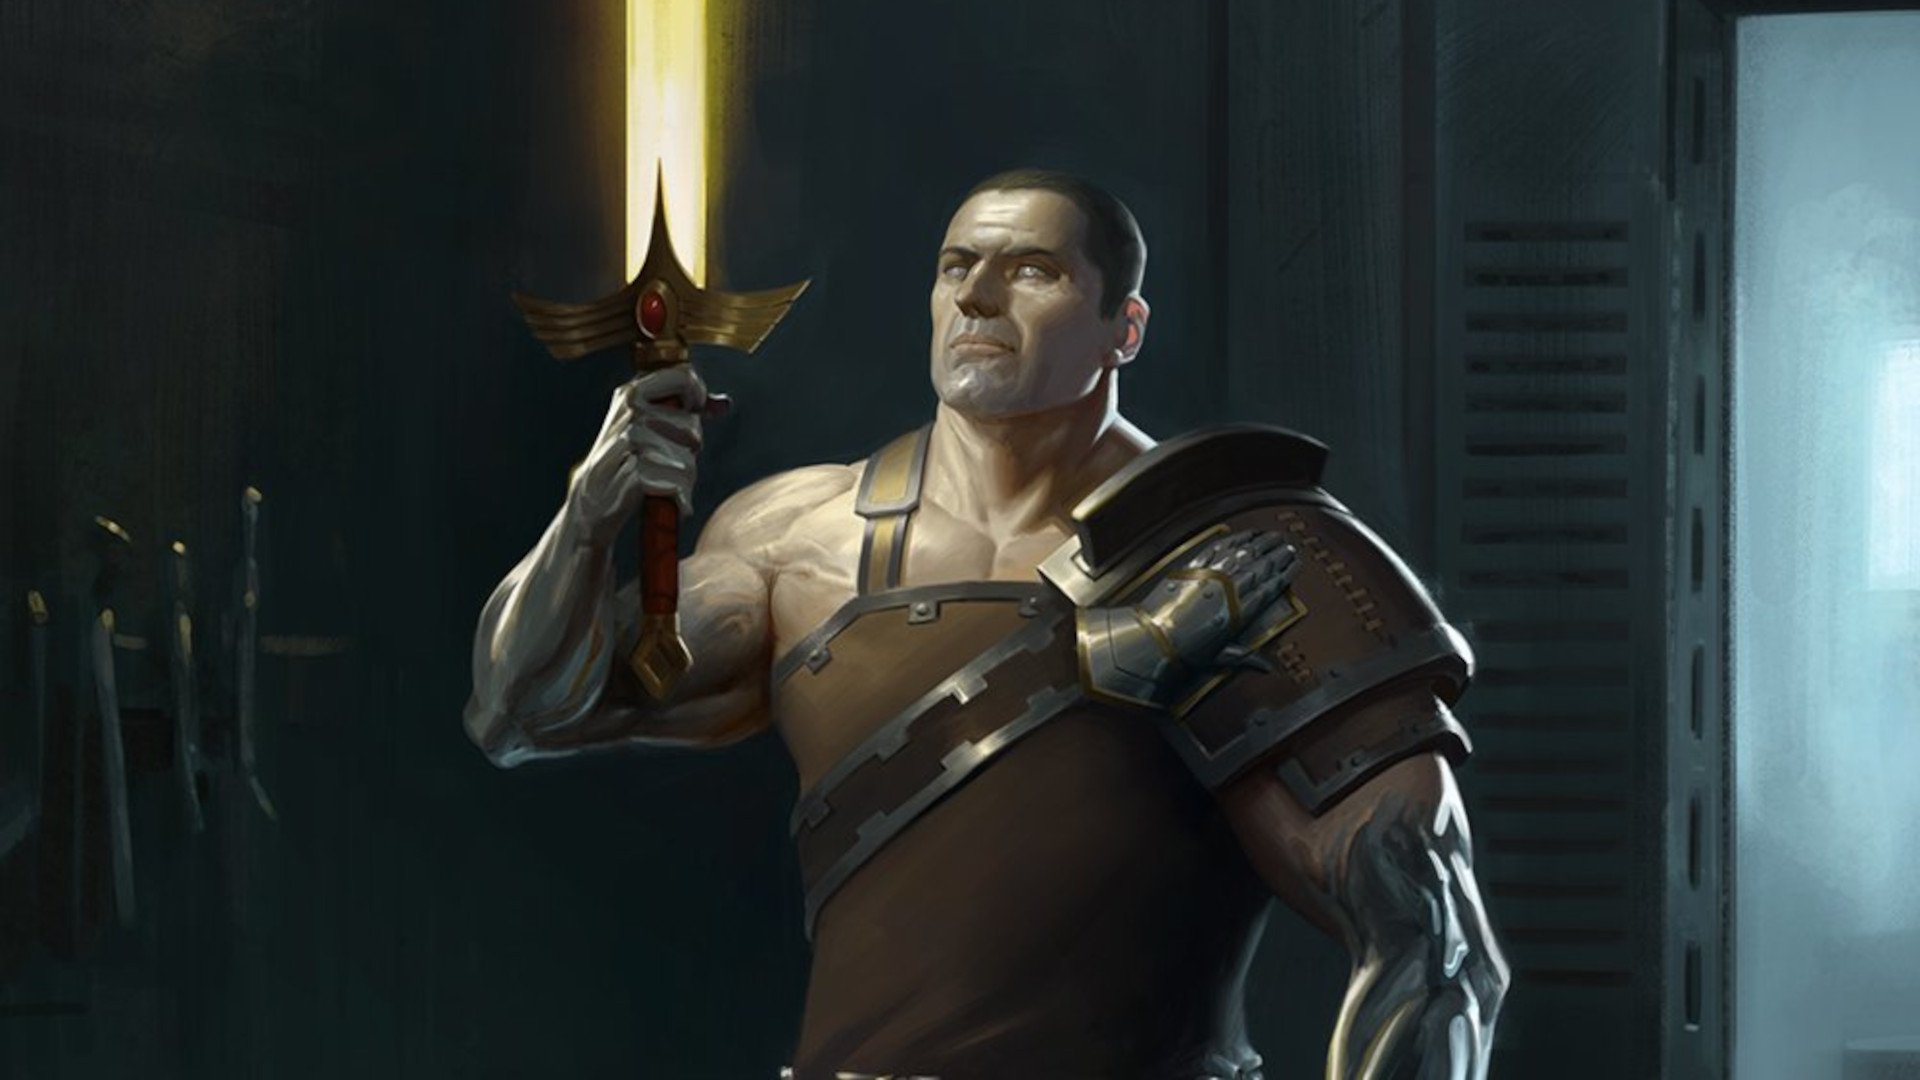 Warhammer 40k primarchs guide - Games Workshop artwork showing the young primarch Ferrus Manus holding a freshly forged sword